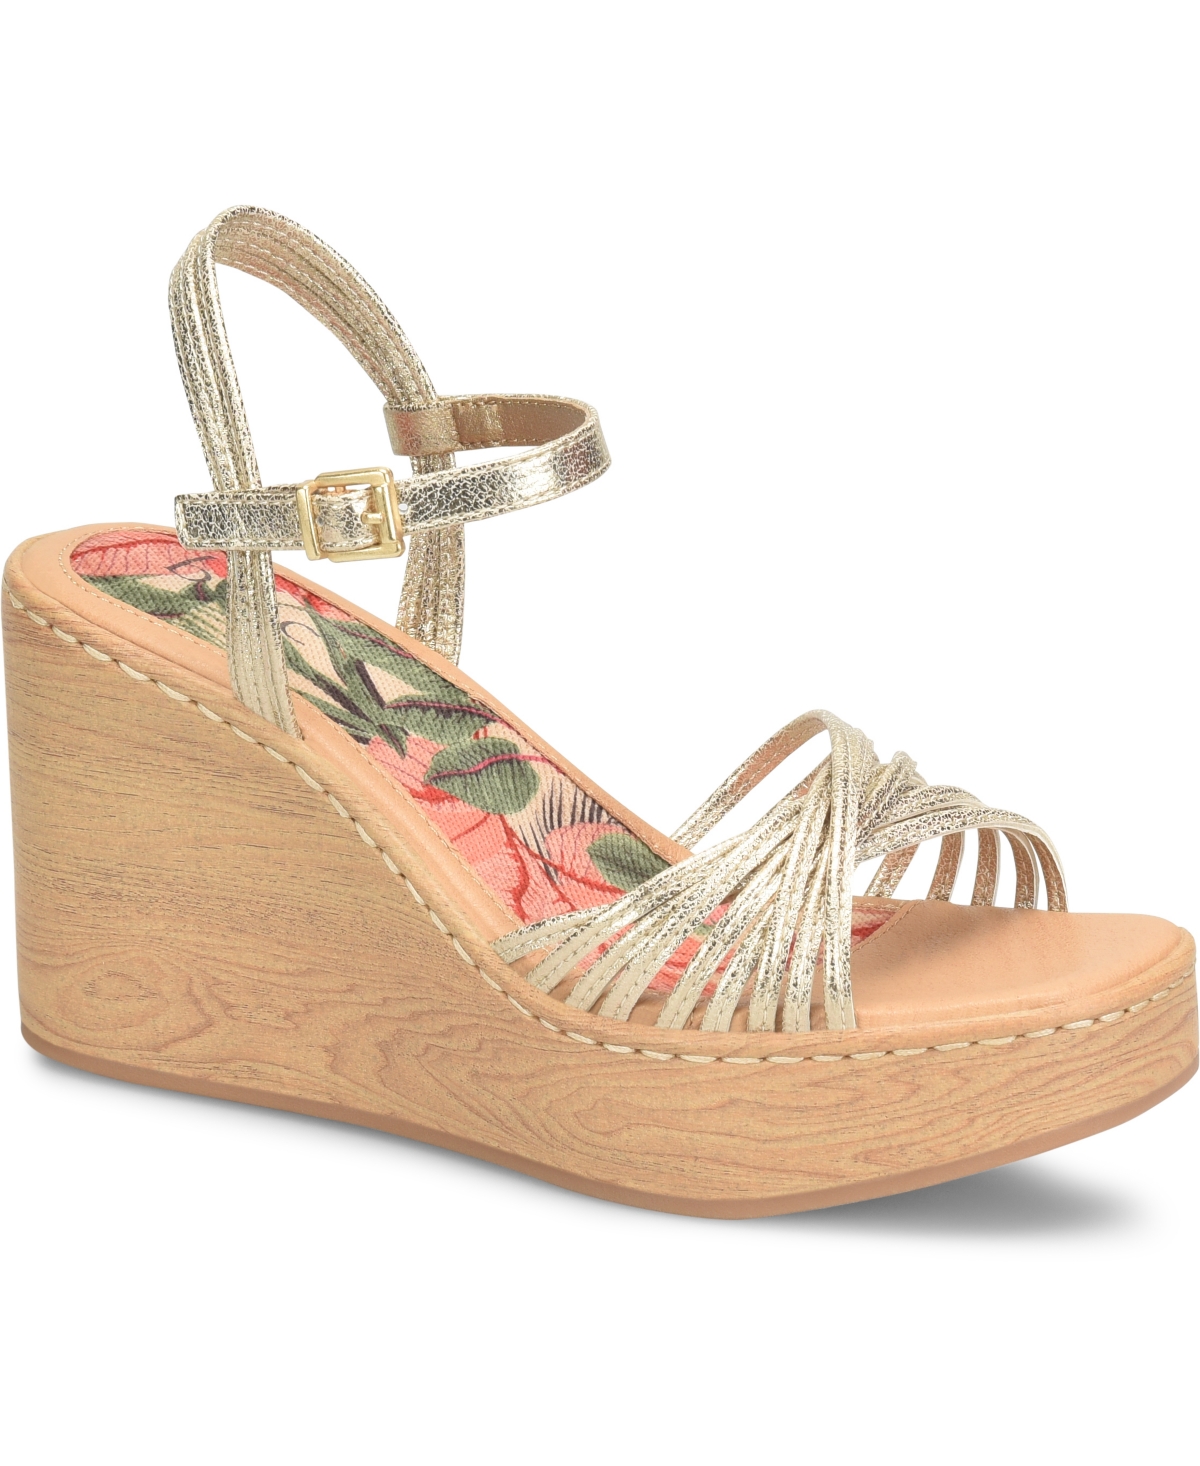 Women's Catalina Strappy Comfort Wedge Sandal - CHAMPAGNE